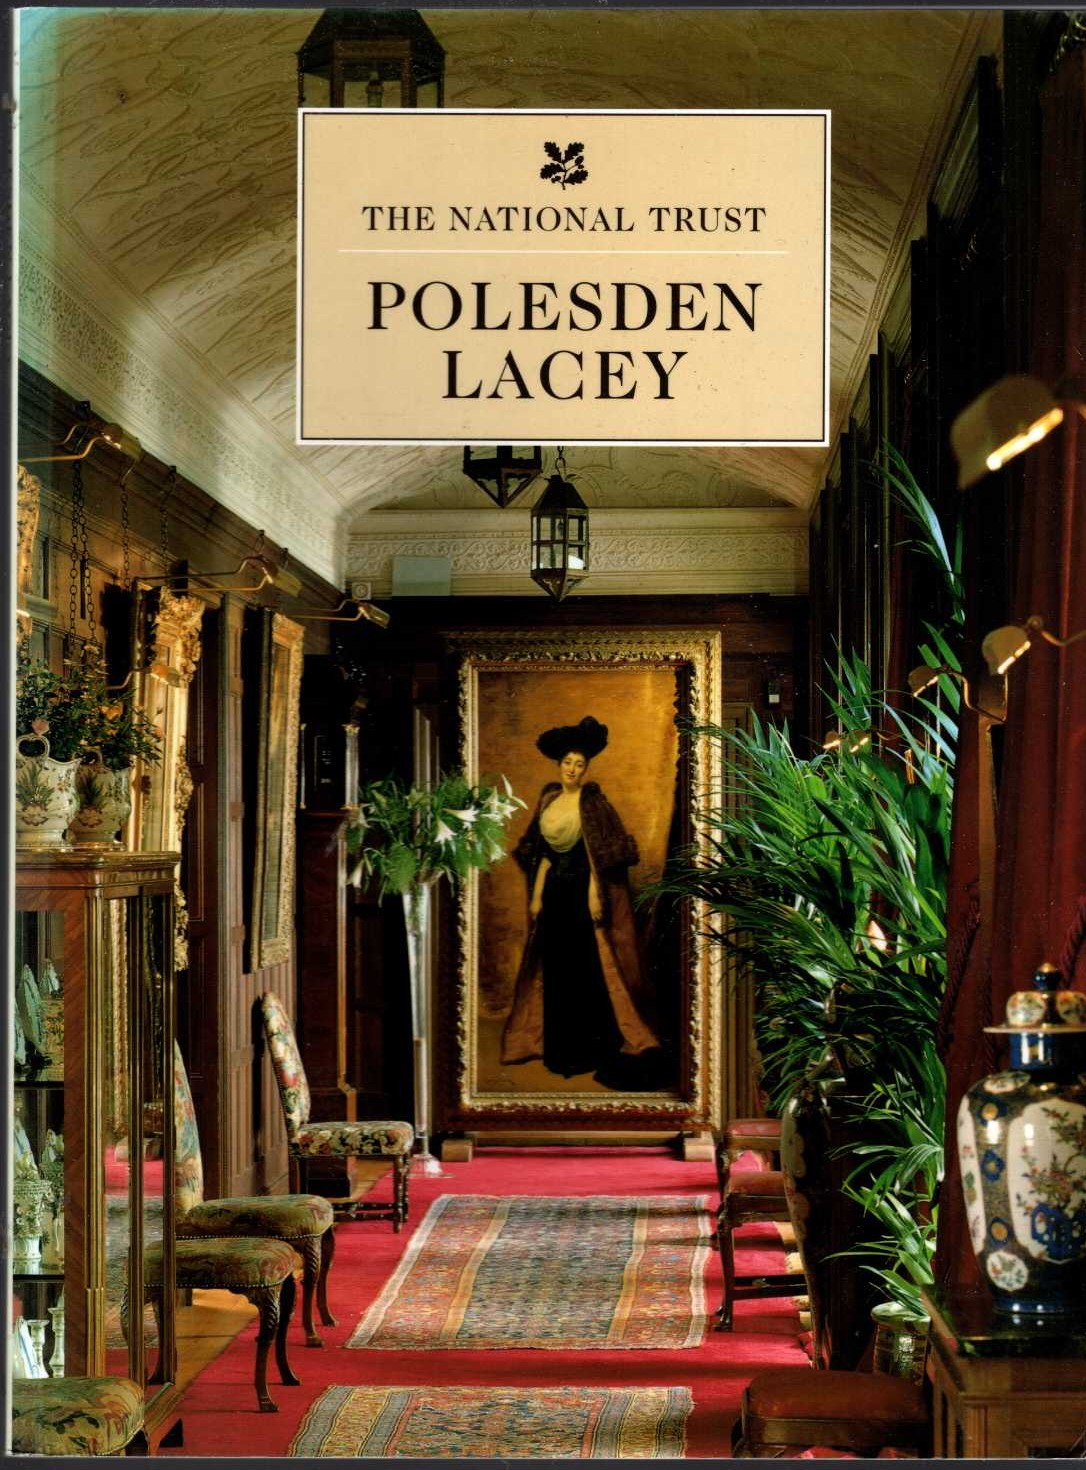 \ POLESDEN LACEY by The National Trust front book cover image